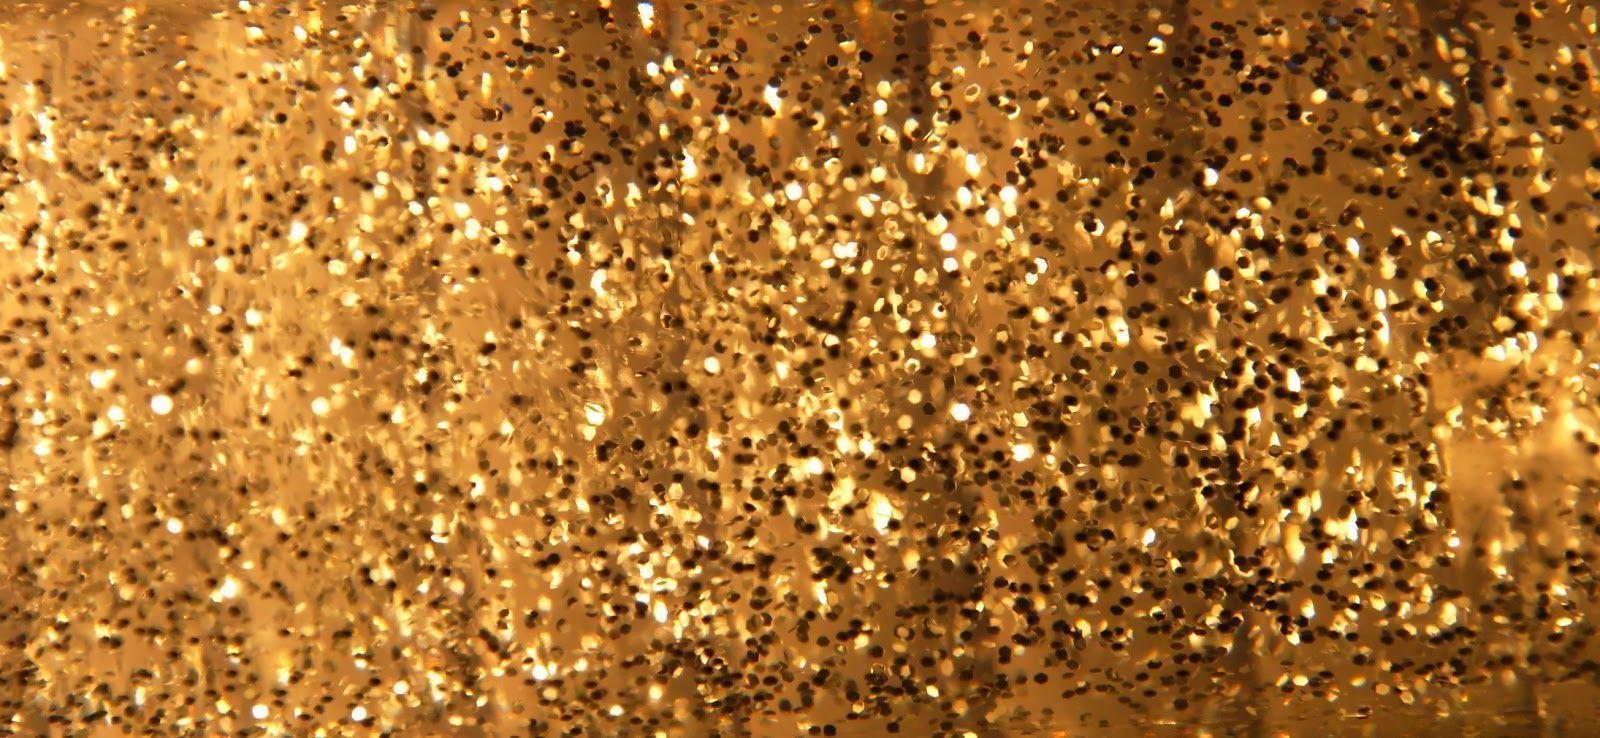 Wallpaper For > Gold Sparkly Wallpaper